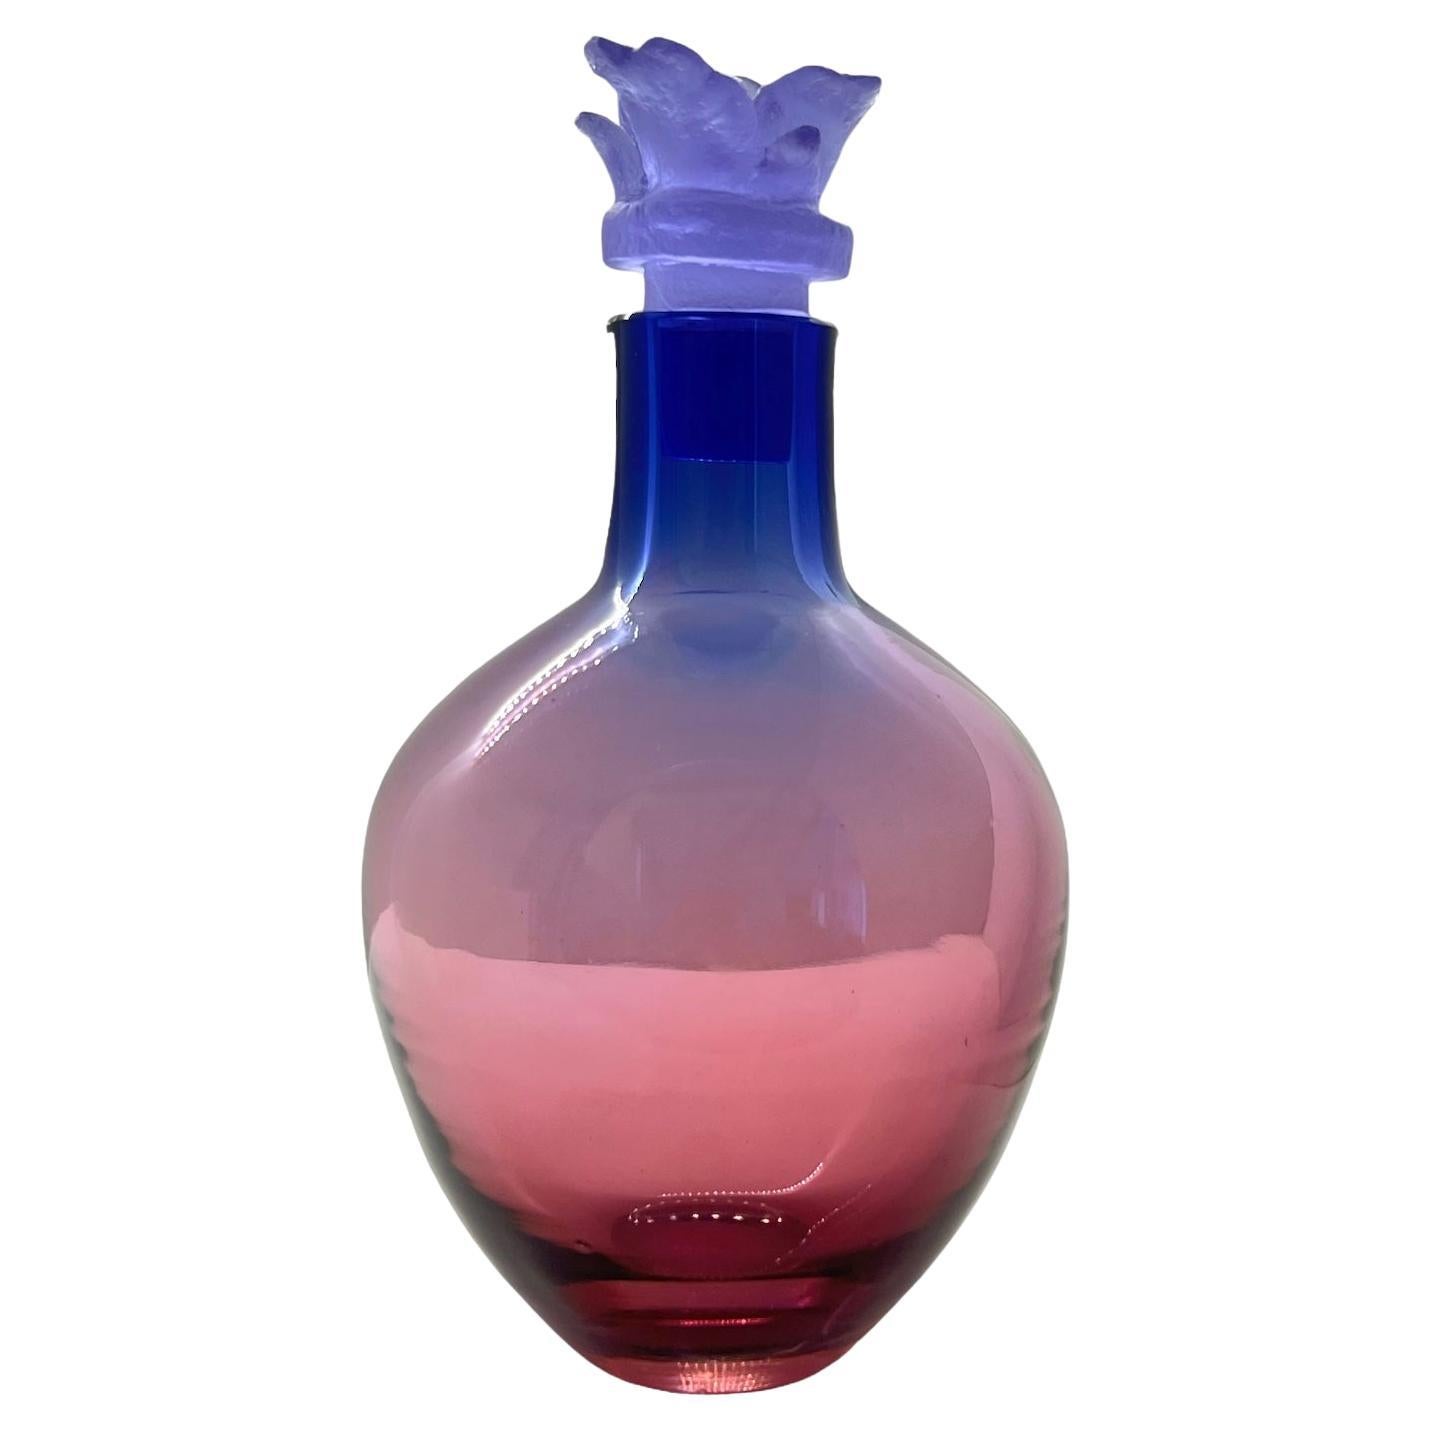 Liquor Decanter in Pink Violet Blue Glass with Hand Crafted Lilac Stopper